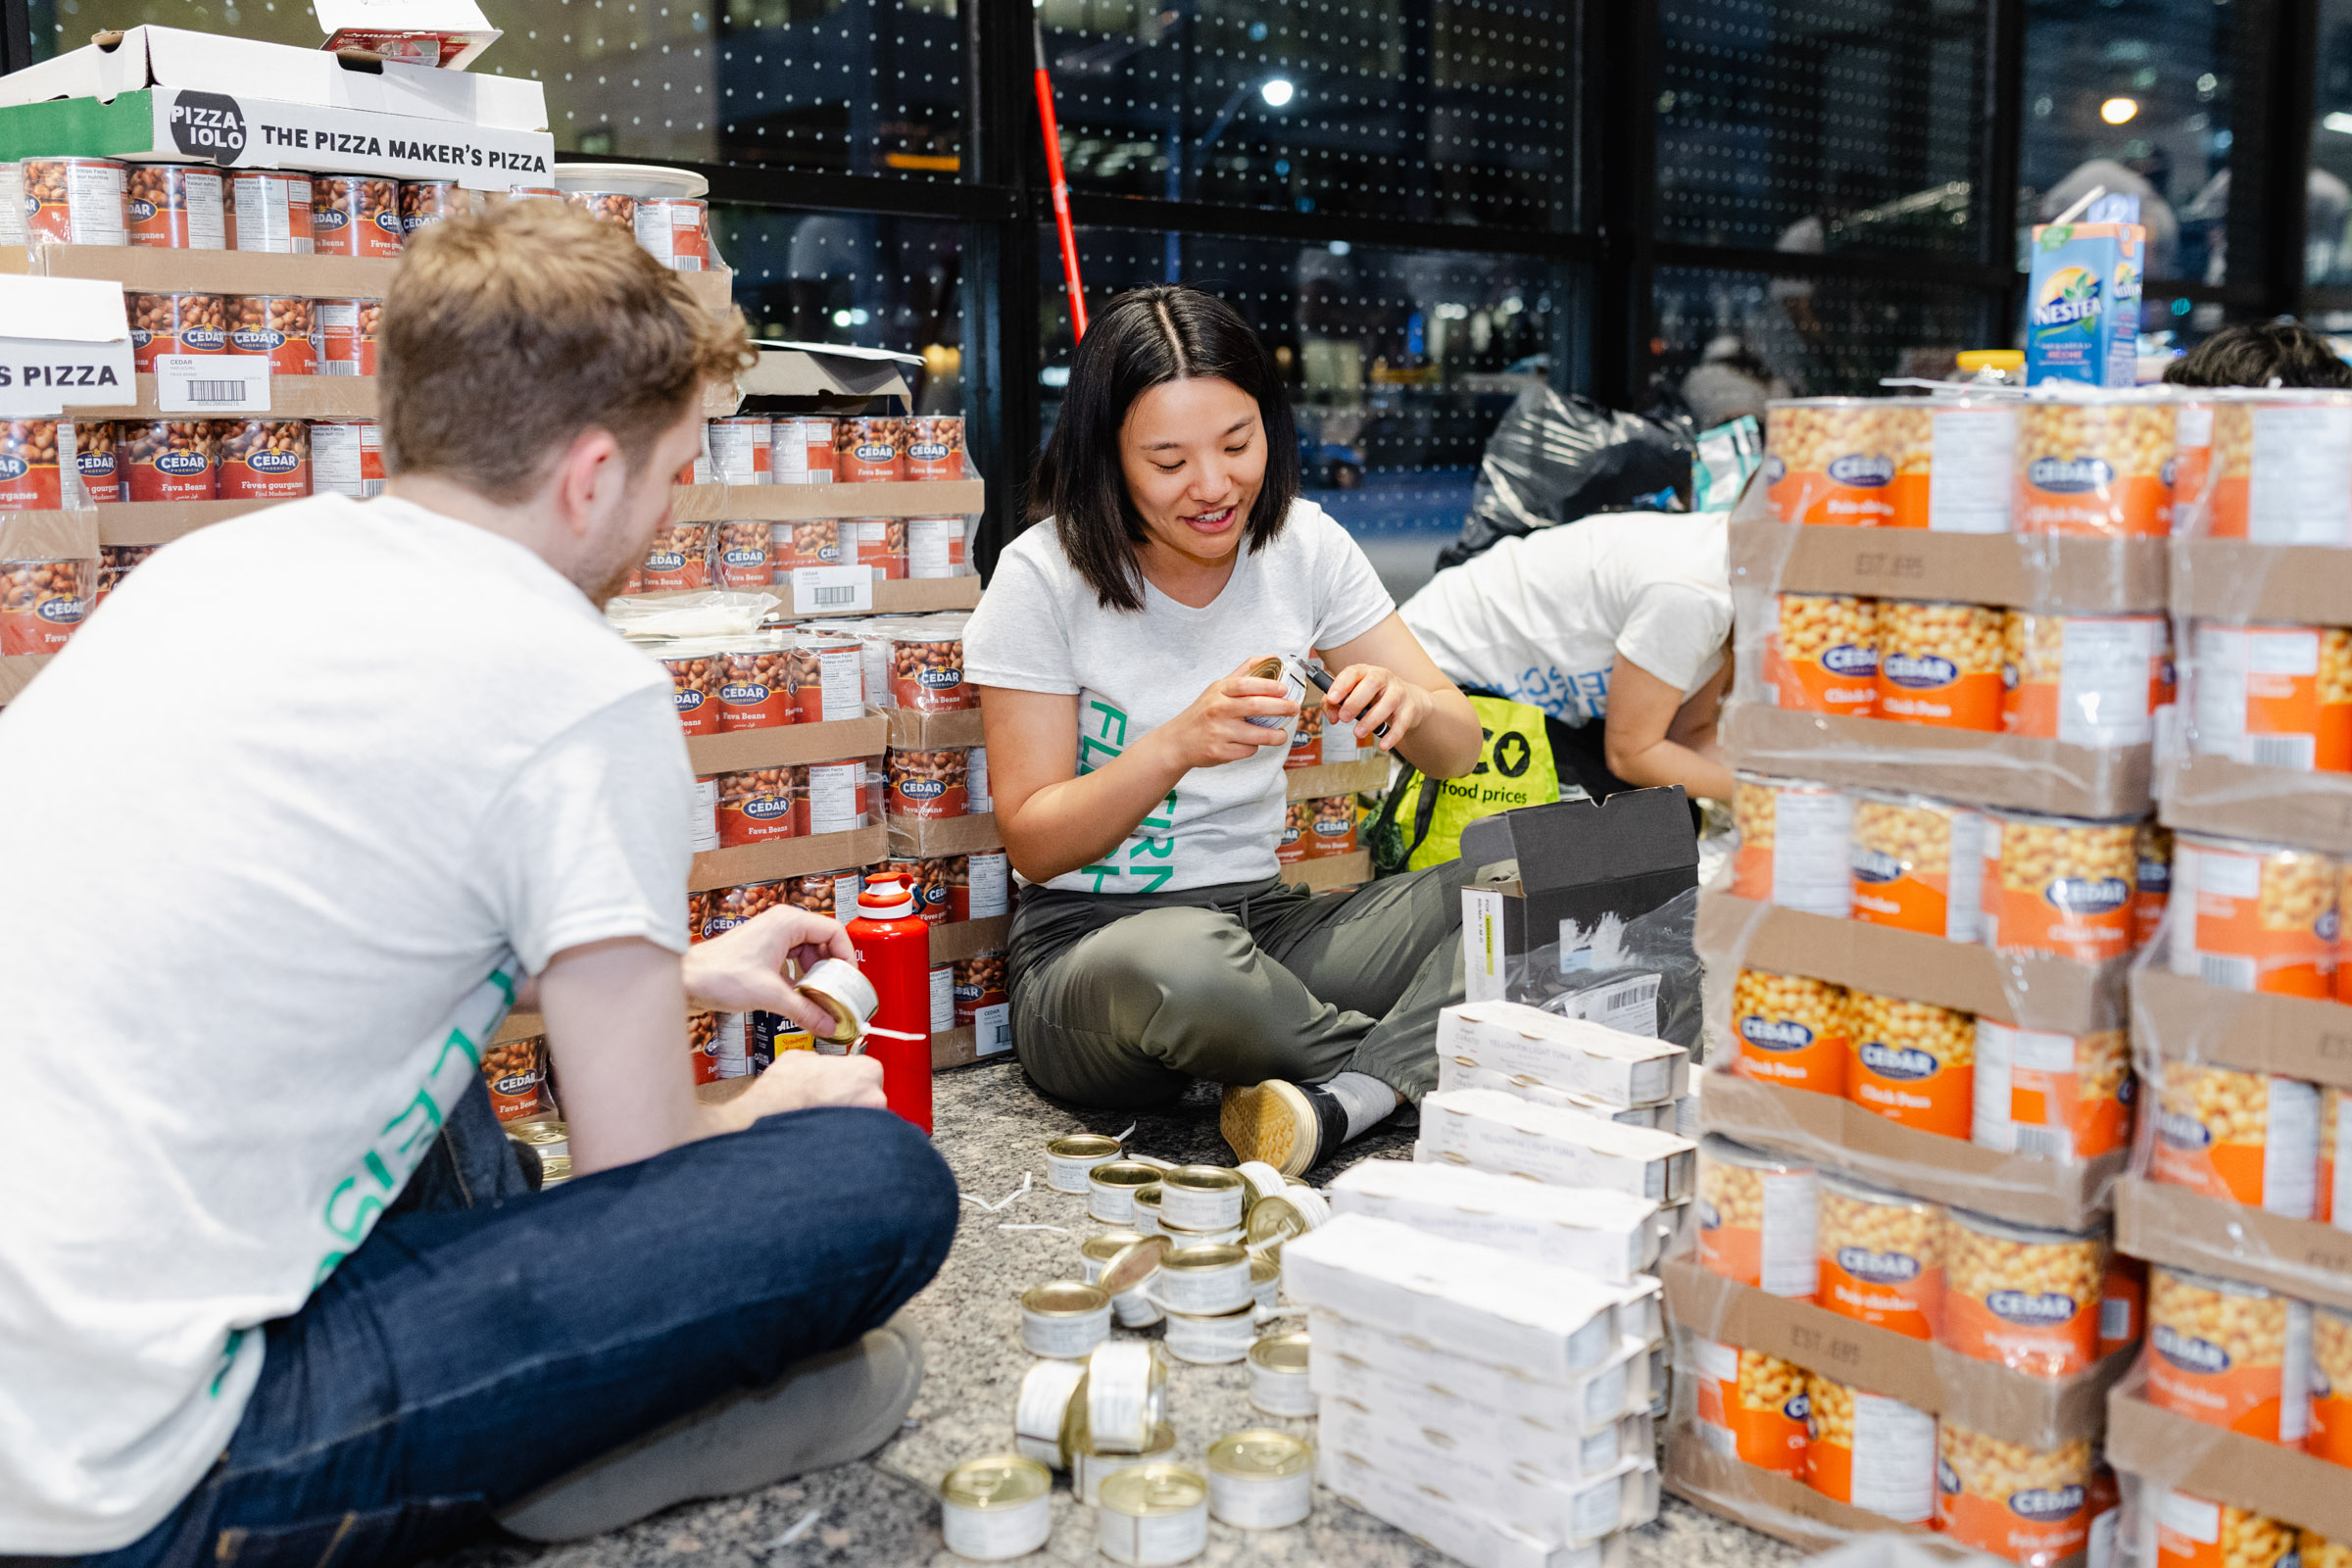 Volunteers seated on the floor organize canned food in a storage area filled with various boxes and stacks of food items, creating a perfect scene for event photography.